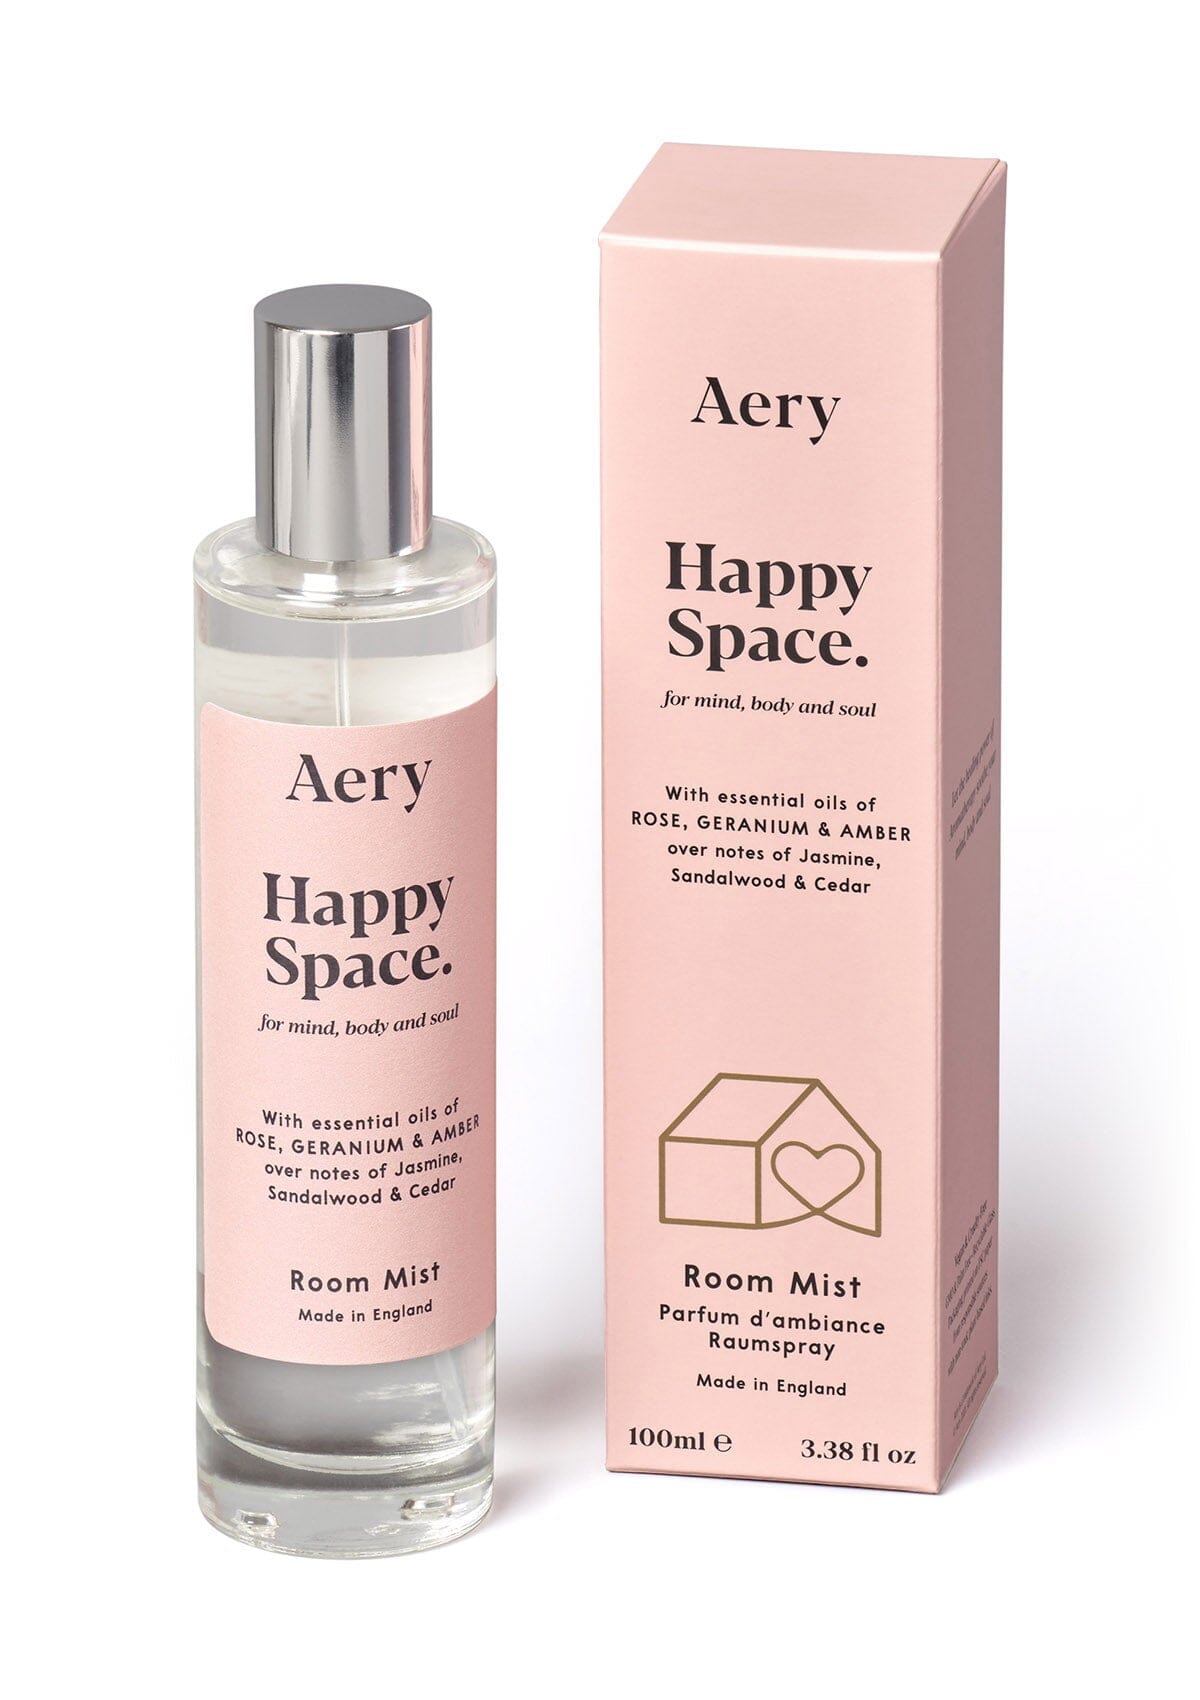 Pink Happy Space room mist displayed next to product packaging by Aery on white background 